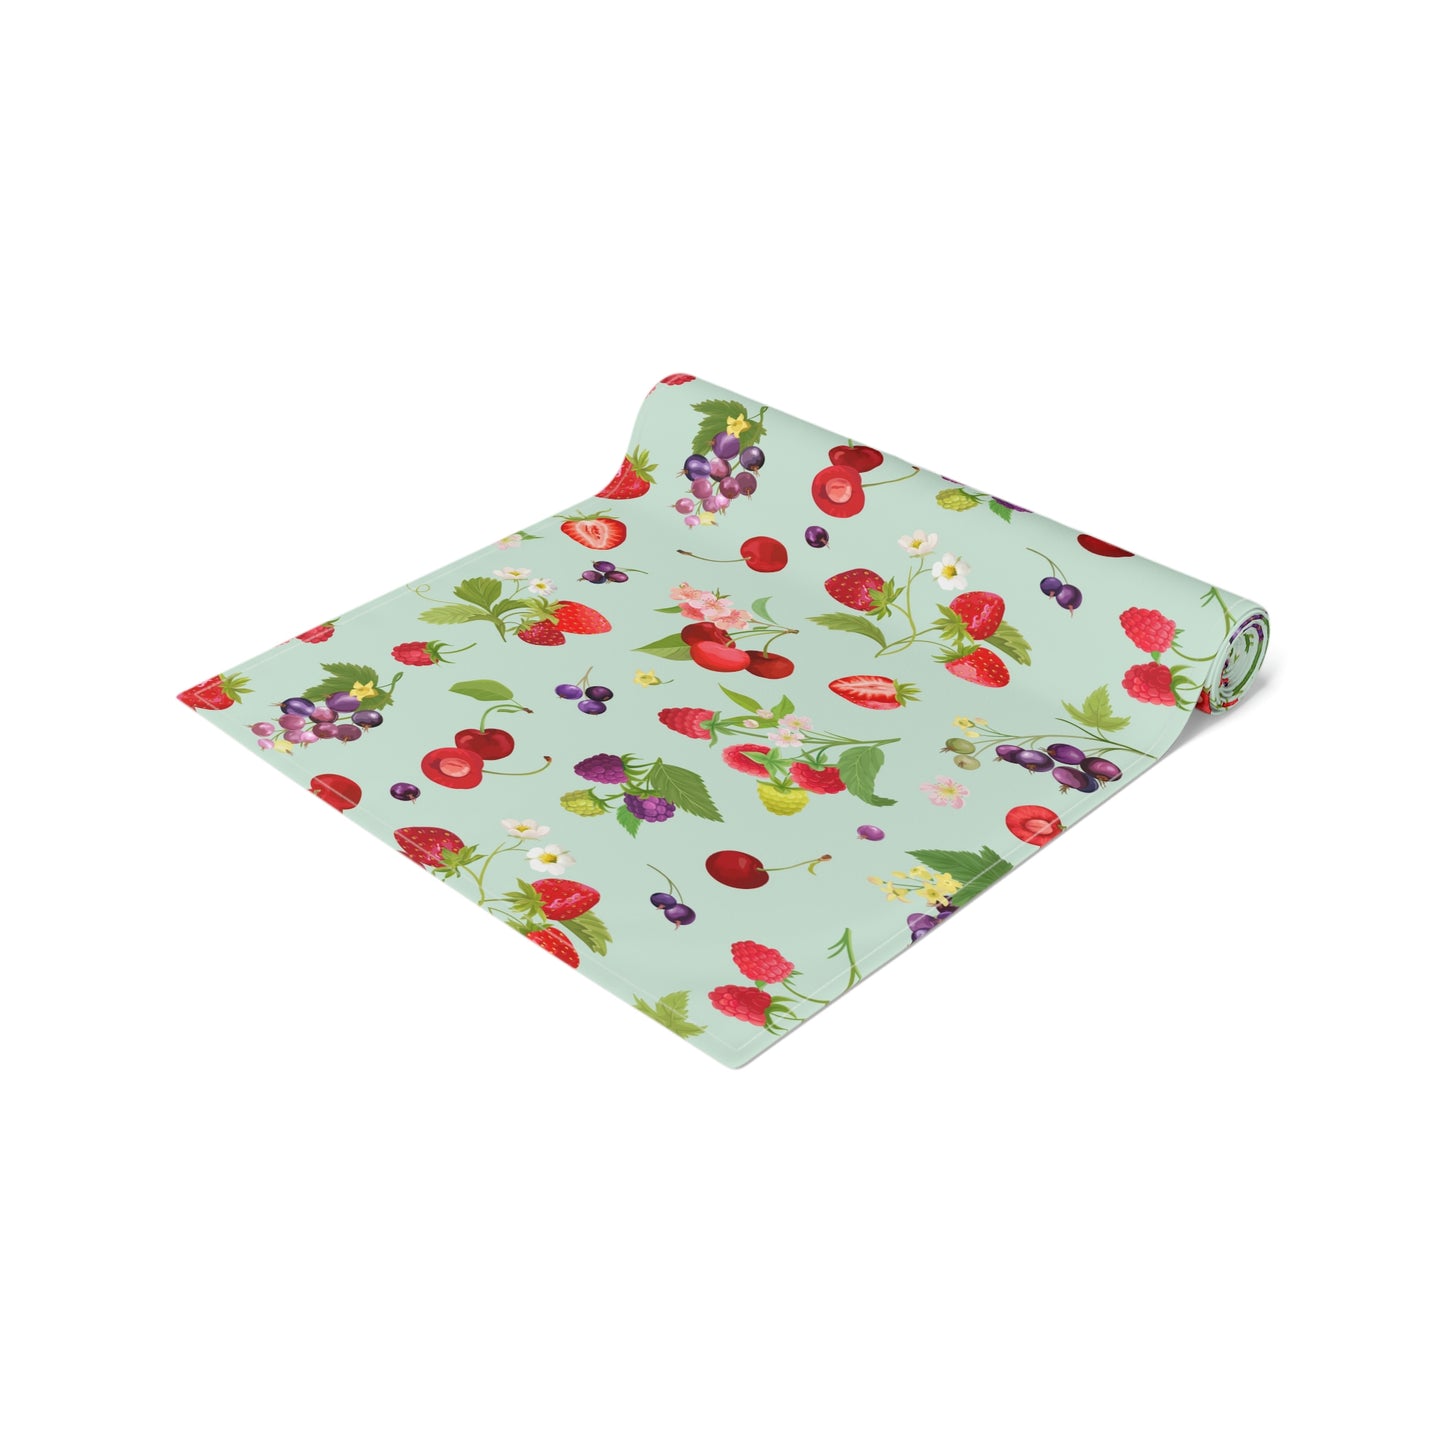 Cherries and Strawberries Table Runner (Cotton, Poly)